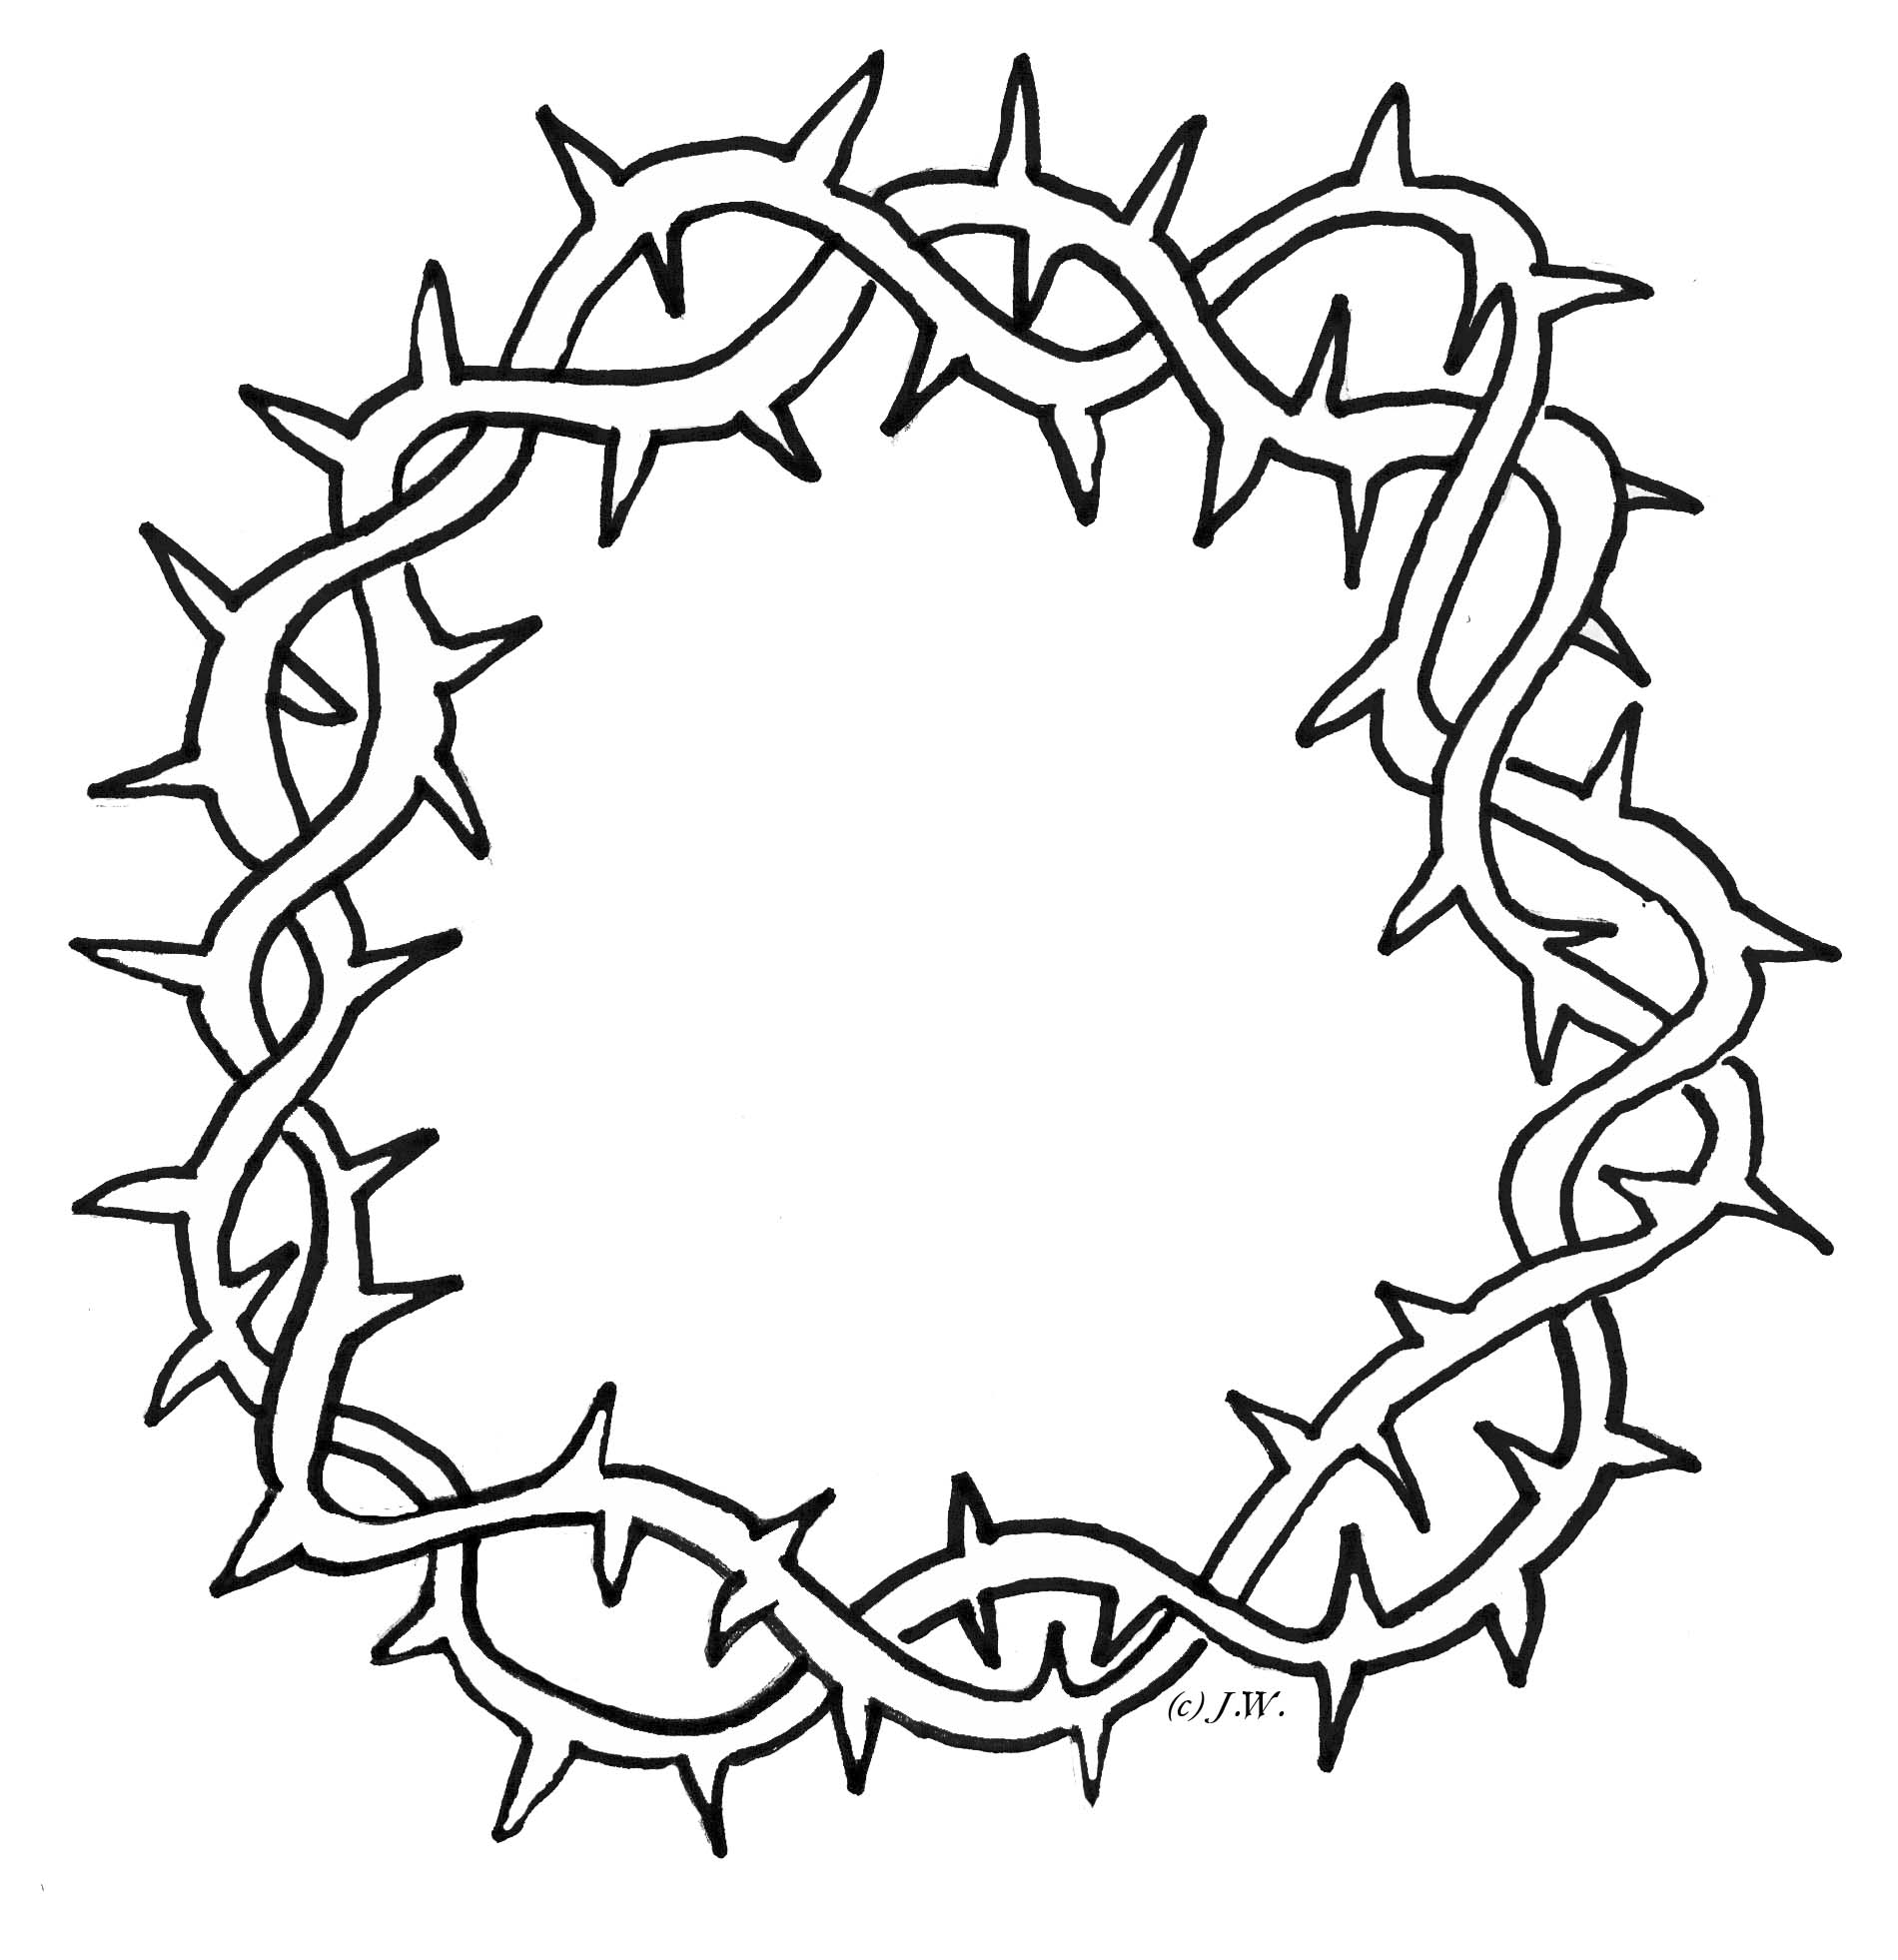 clipart cross and crown - photo #36